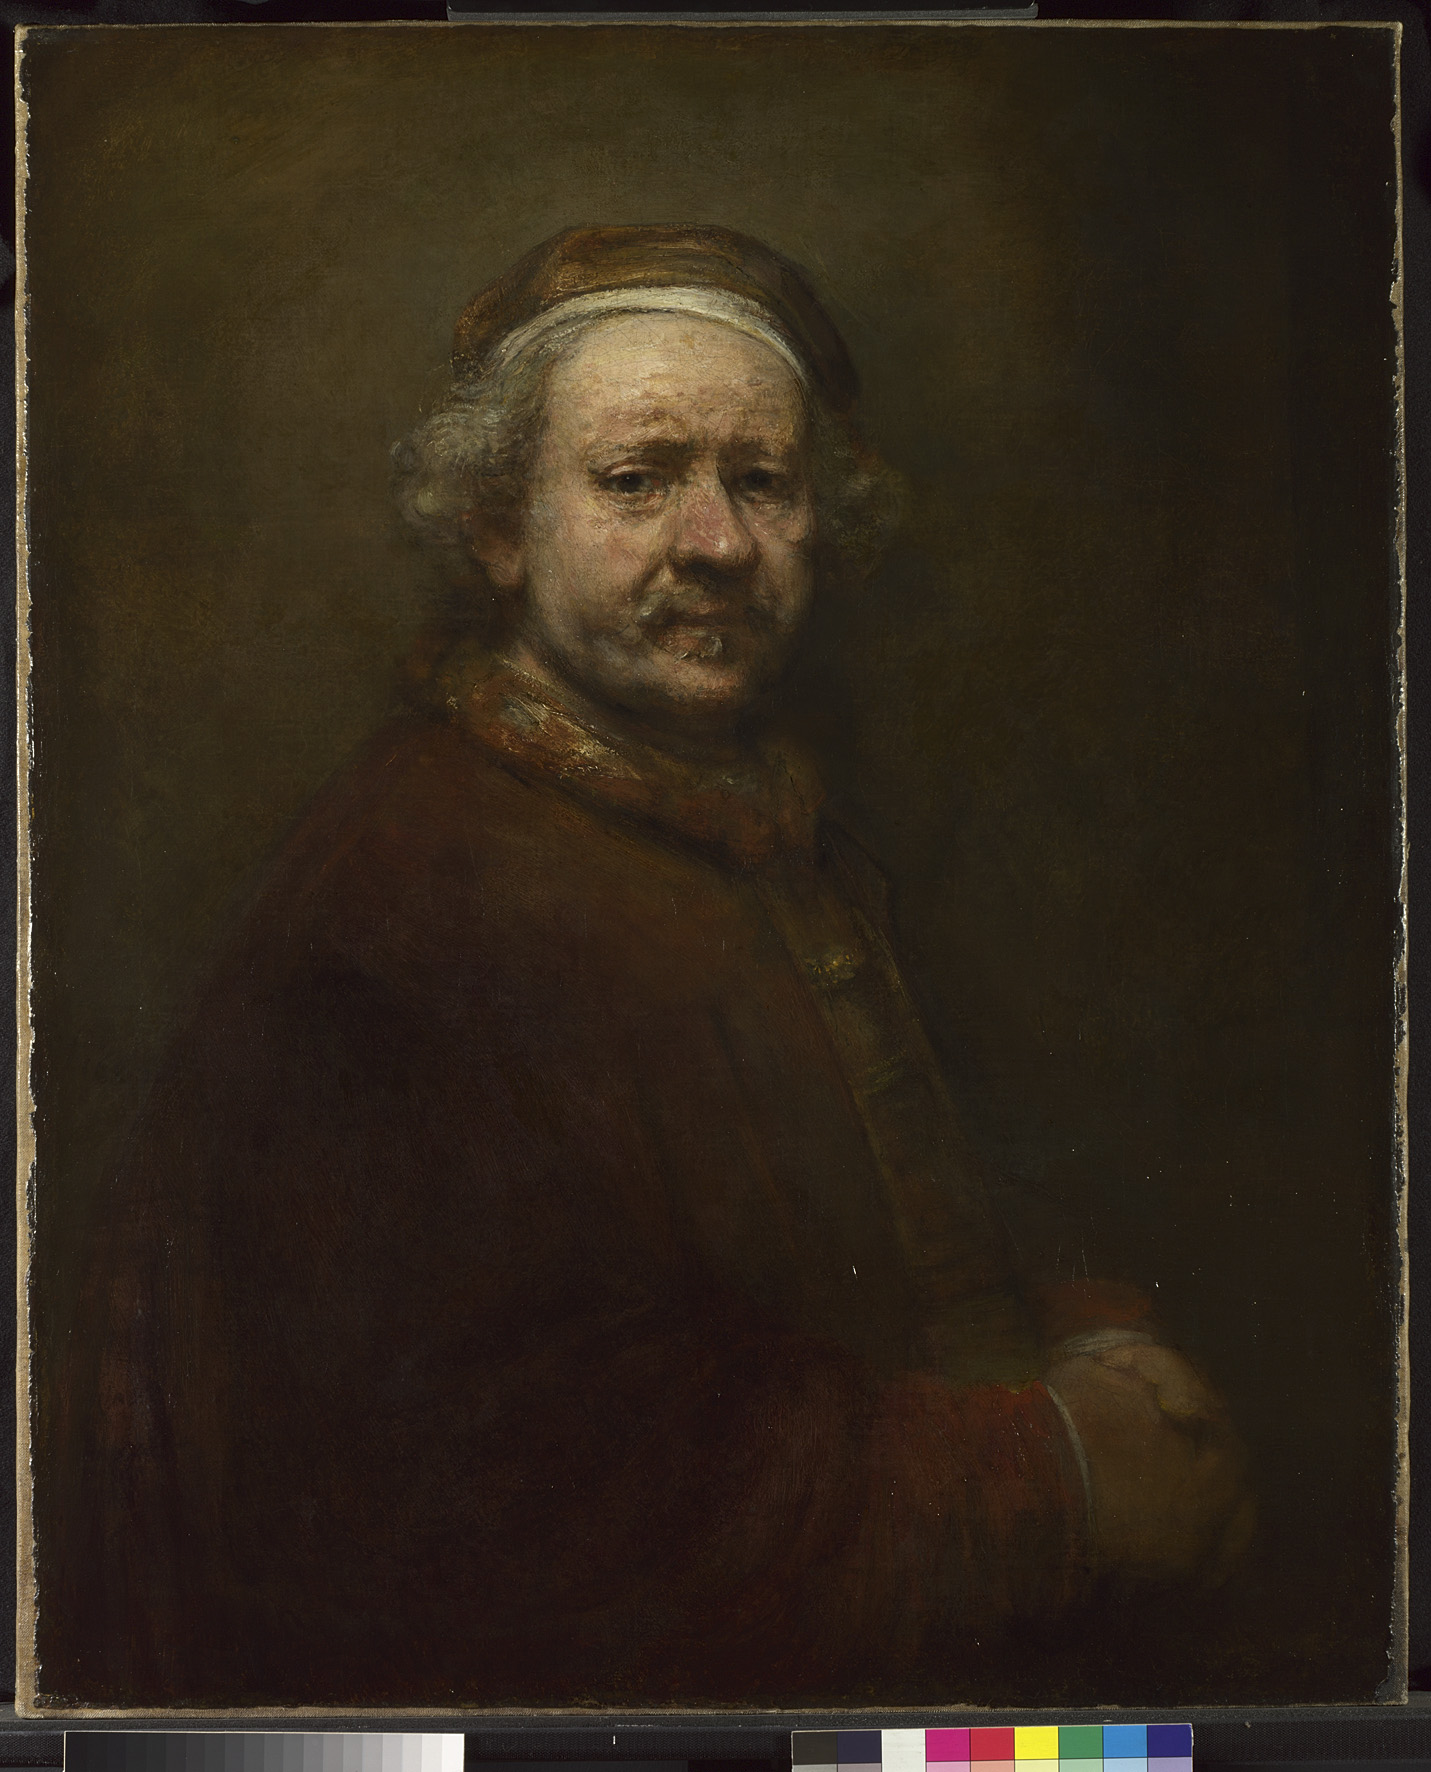 NG221
Rembrandt 
Self Portrait at the Age of 63, 1669
Oil on canvas
86 x 70.5 cm
© The National Gallery, London